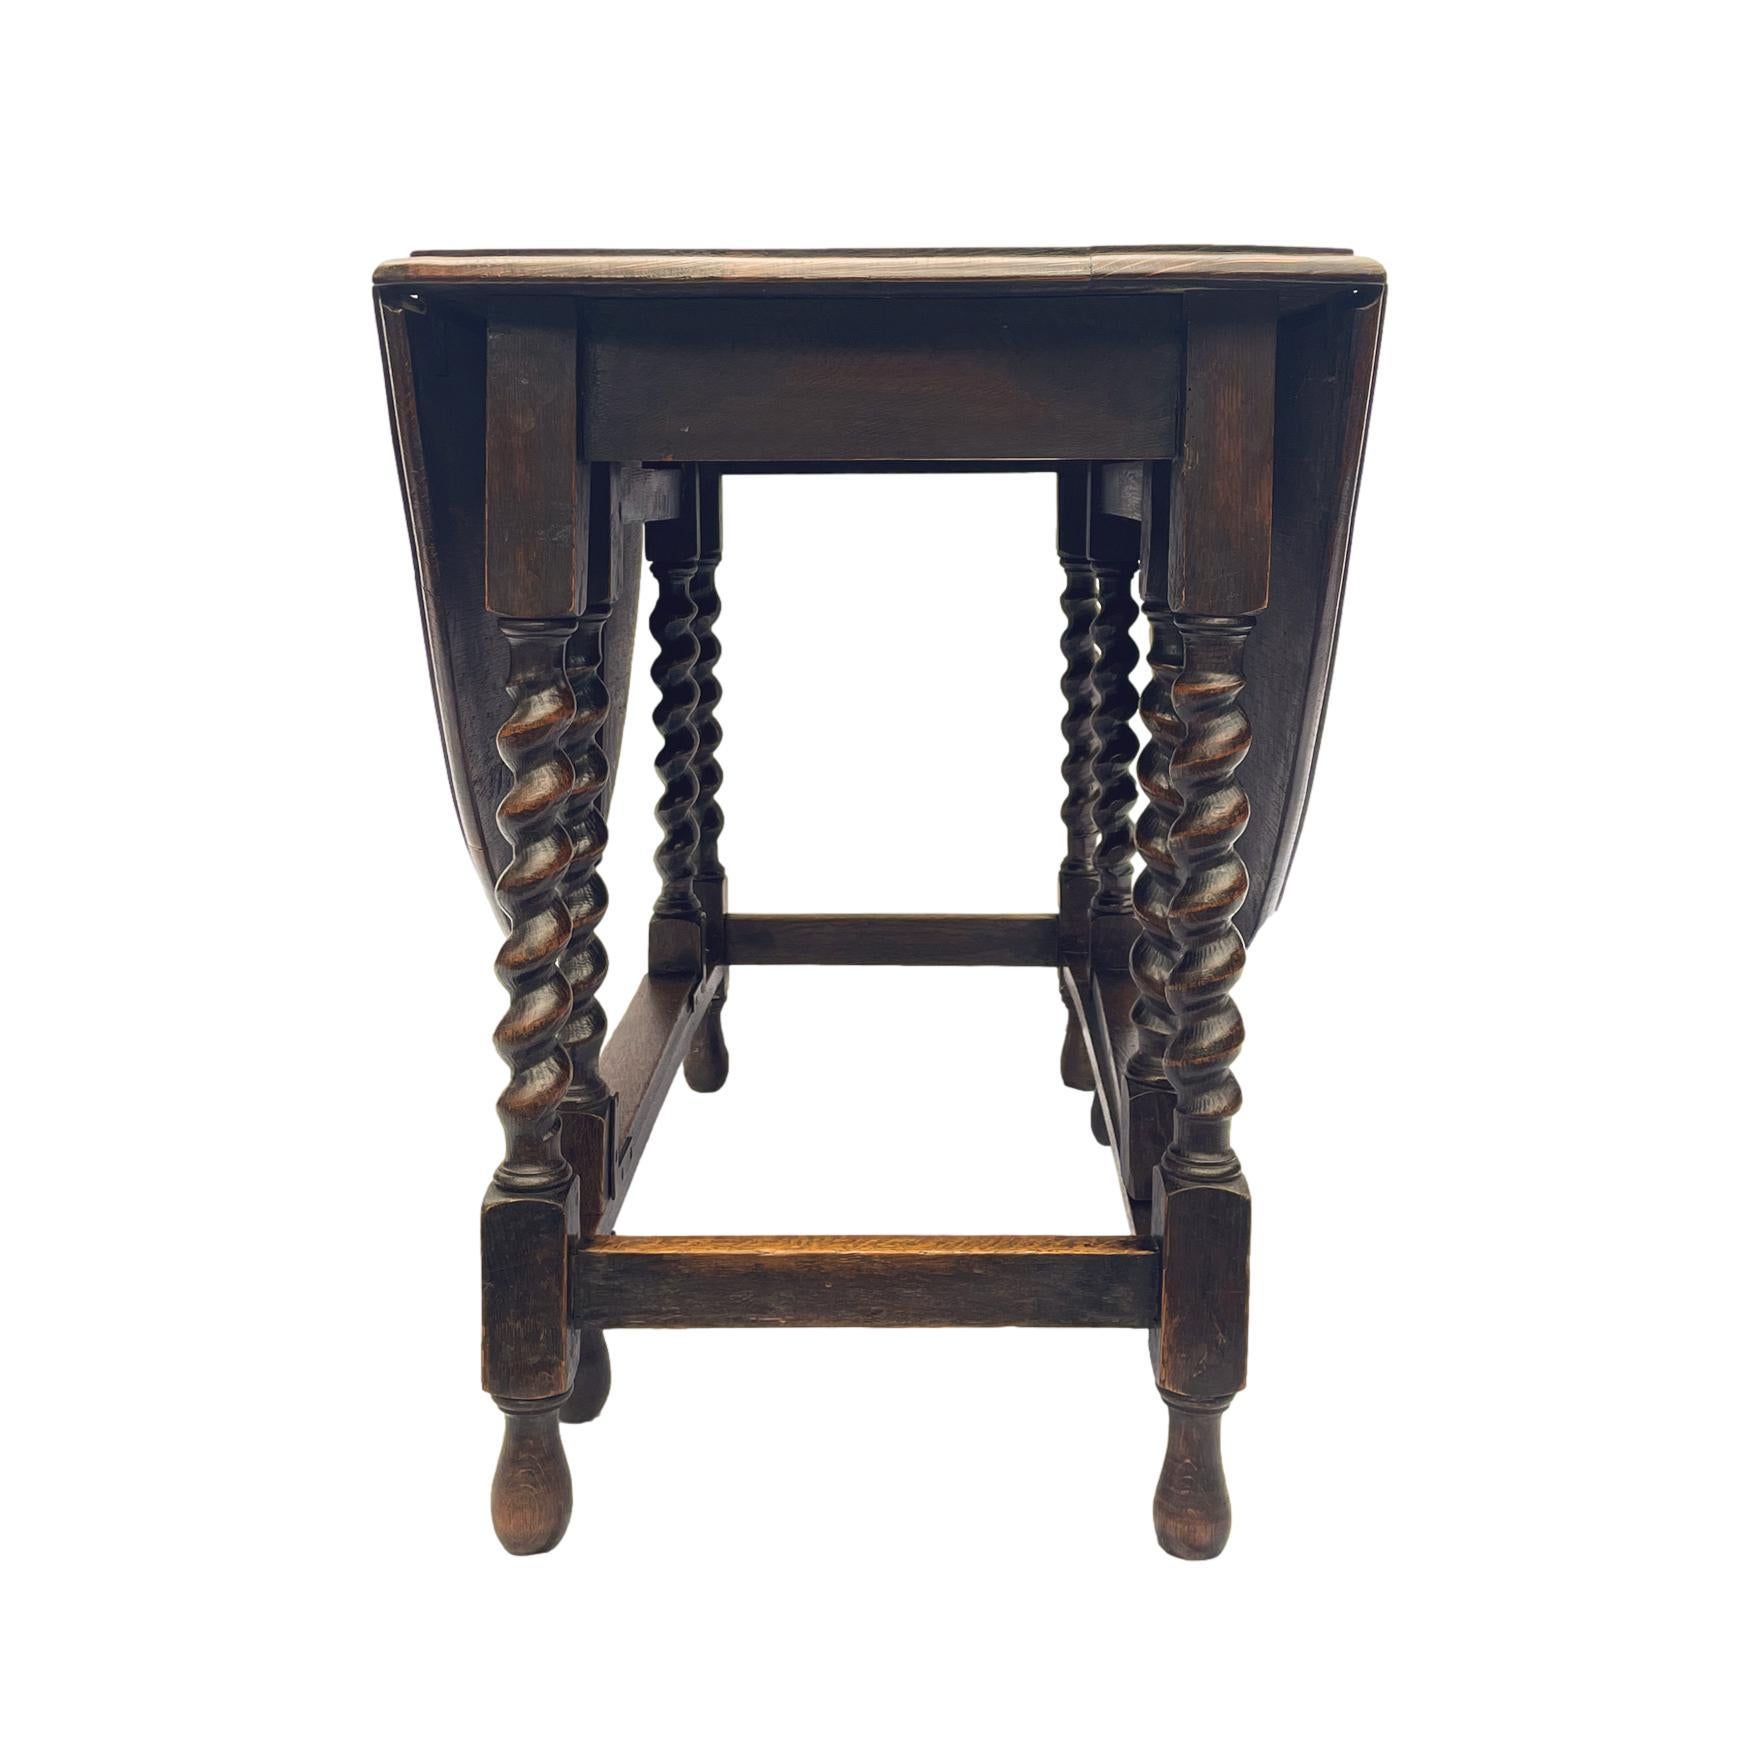 Hand-Carved Oak Barley Twist Drop-Leaf Table with a Carved Top, English, circa 1920